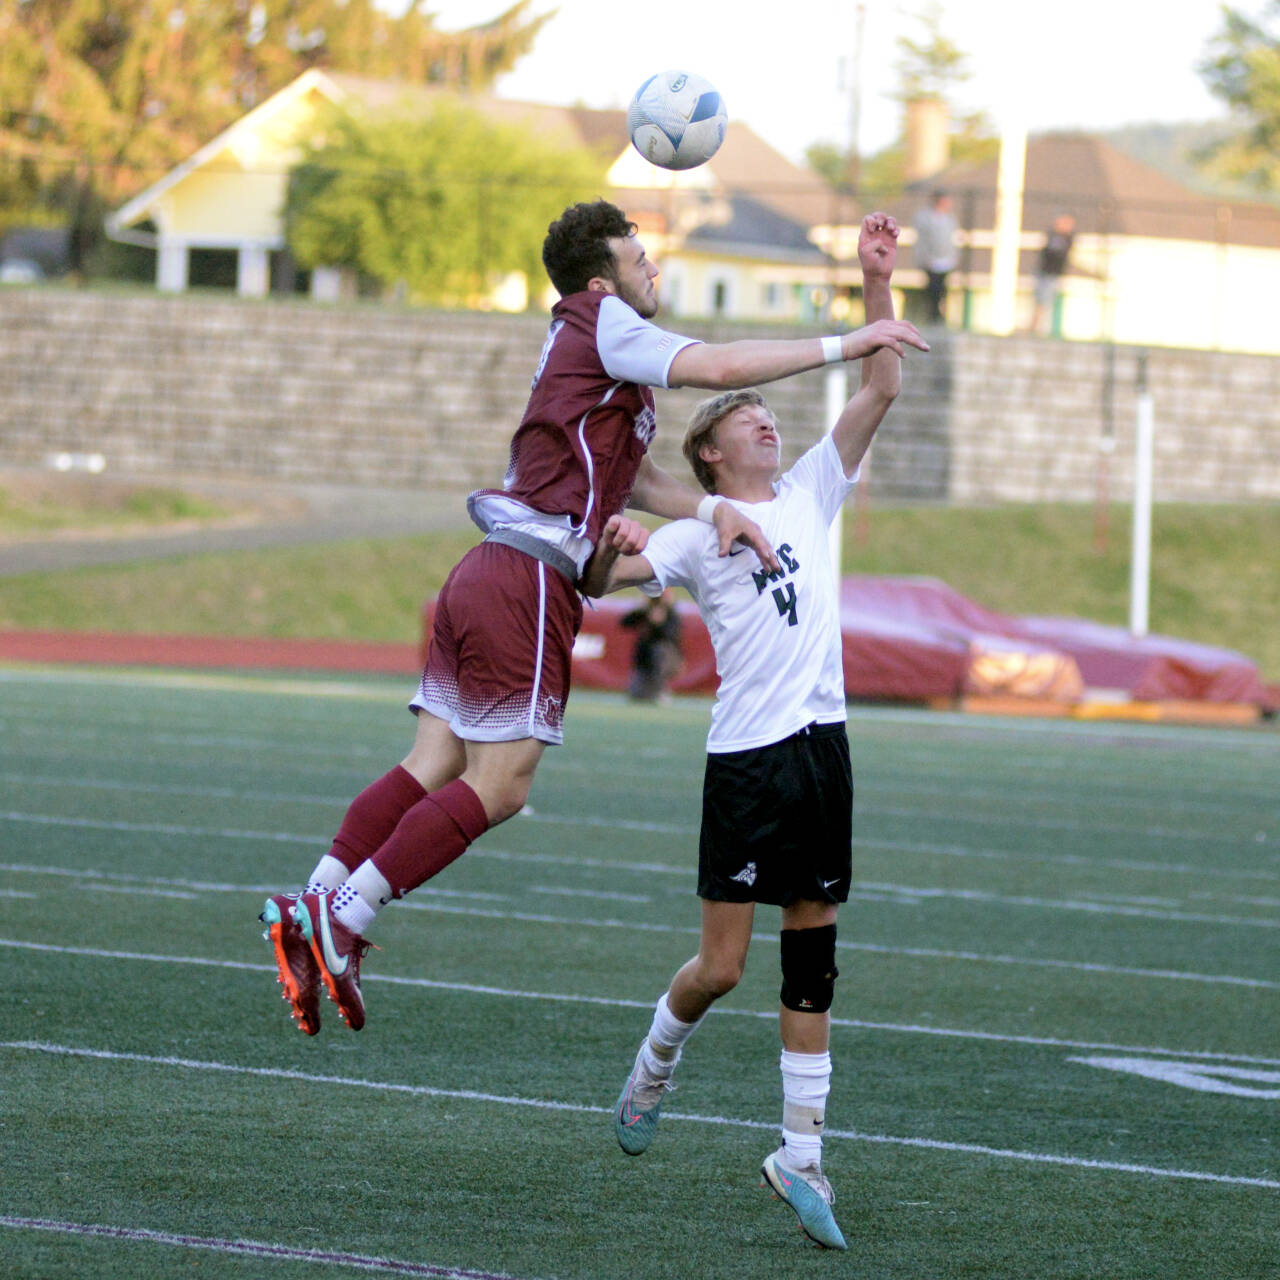 RYAN SPARKS | THE DAILY WORLD Montesano senior Mateo Sanchez, left, heads the ball against Northwest Christian’s Wesley Jones during the Bulldogs’ 1-0 victory in a 1A State Tournament game on Friday at Jack Rottle Field in Montesano.